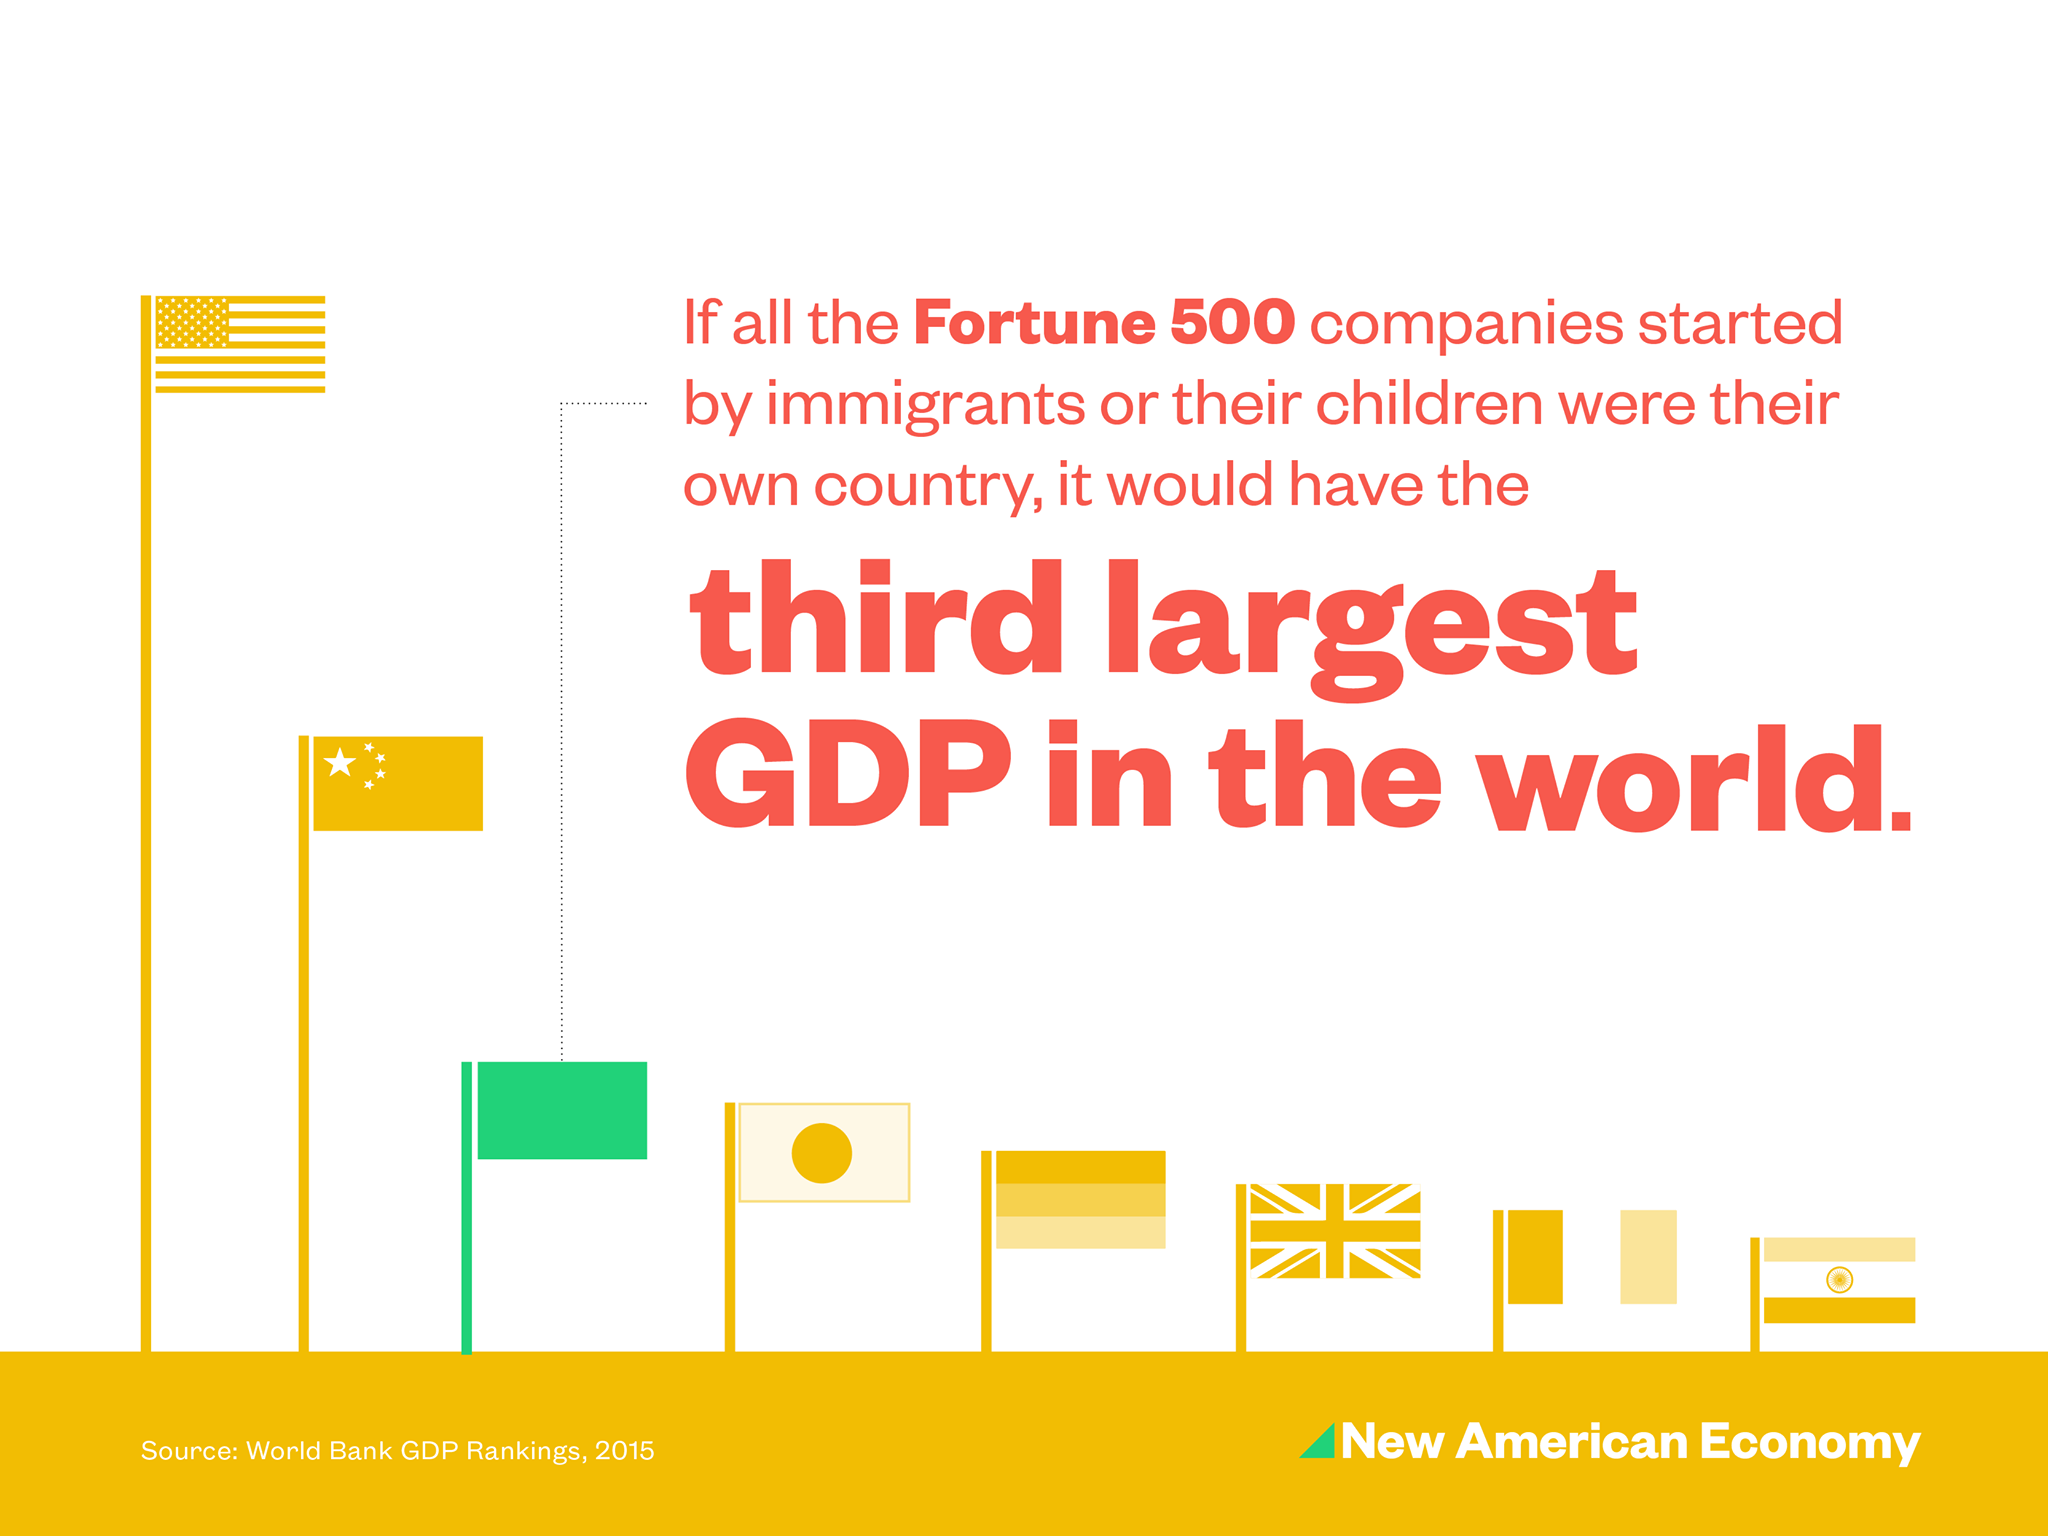 If all the Fortune 500 companies started by immigrants or their children were their own country, it would have the third largest GDP in the world.